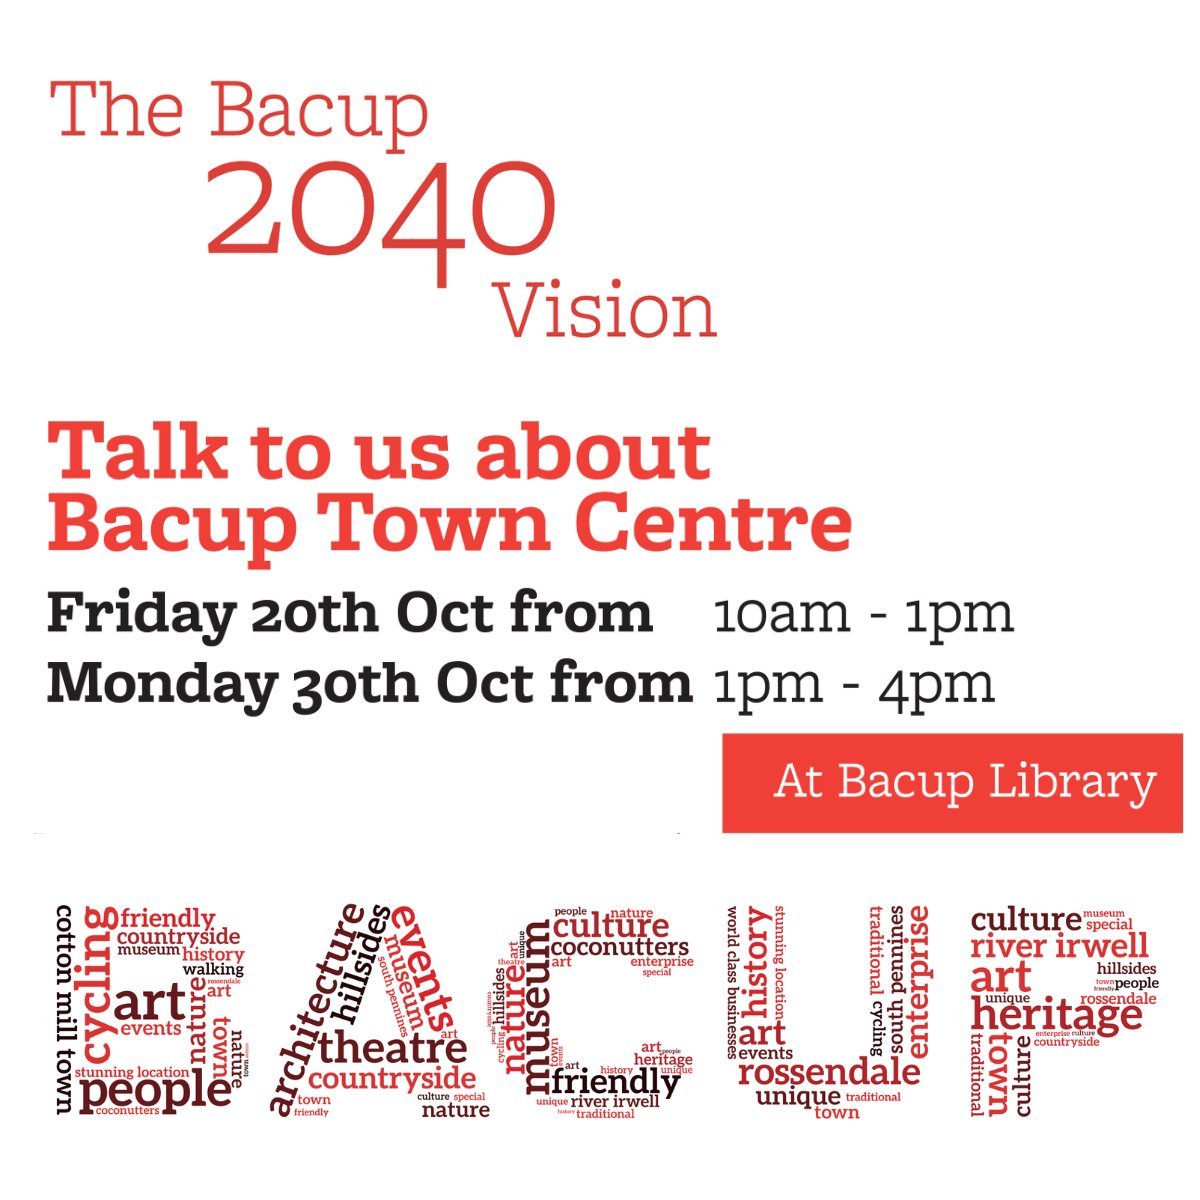 Exciting developments are coming to Bacup Market & your opinion counts! Come & talk to us about Bacup at Bacup Library on: - Friday 20th October from 10am-1pm -Monday 30th October from 1pm-4pm Participate in our survey and be a part of the transformation: bit.ly/BacupMarketSur…